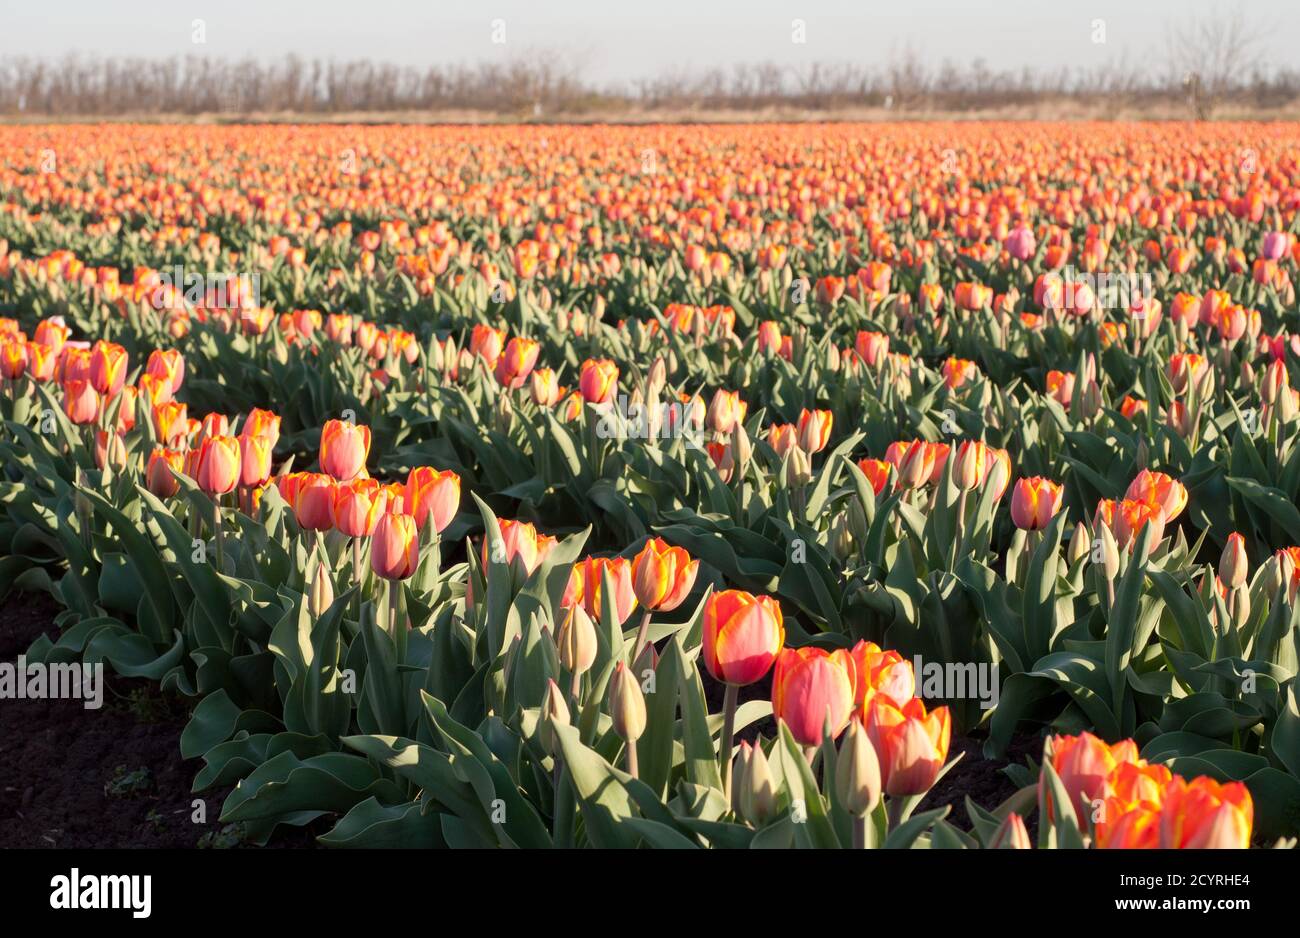 Field of red tulips. Growing tulip flowers in spring. Red tulip fields. Agriculture. Stock Photo